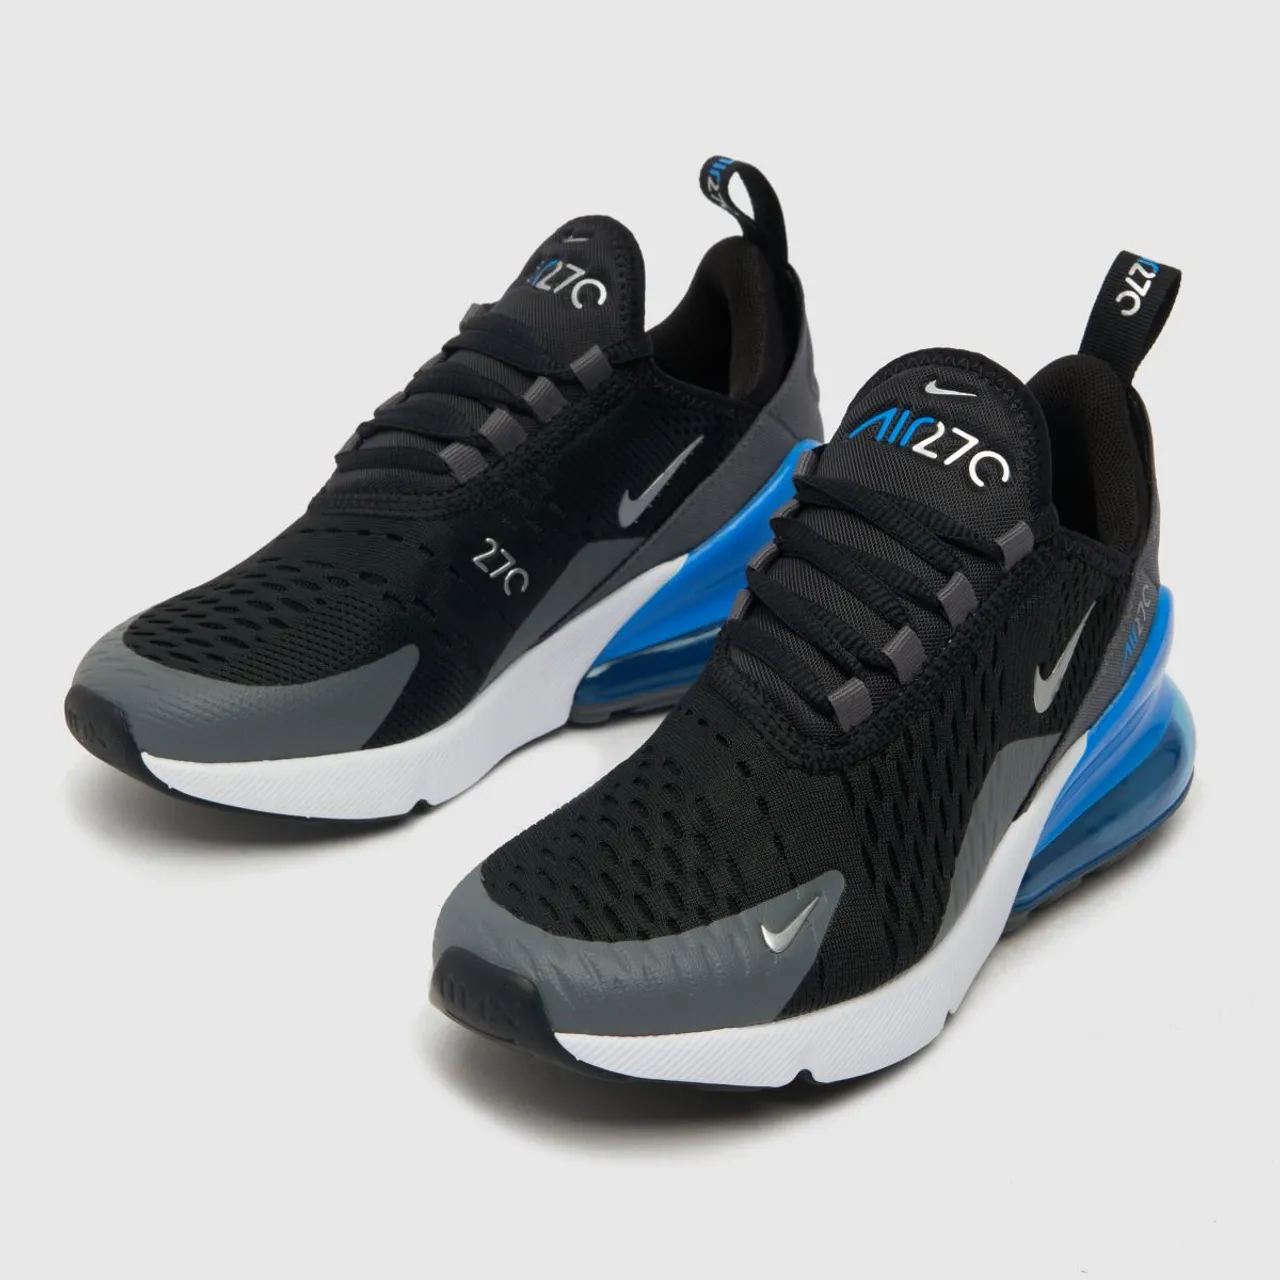 Nike Black And Blue Air Max 270 Boys Youth Trainers